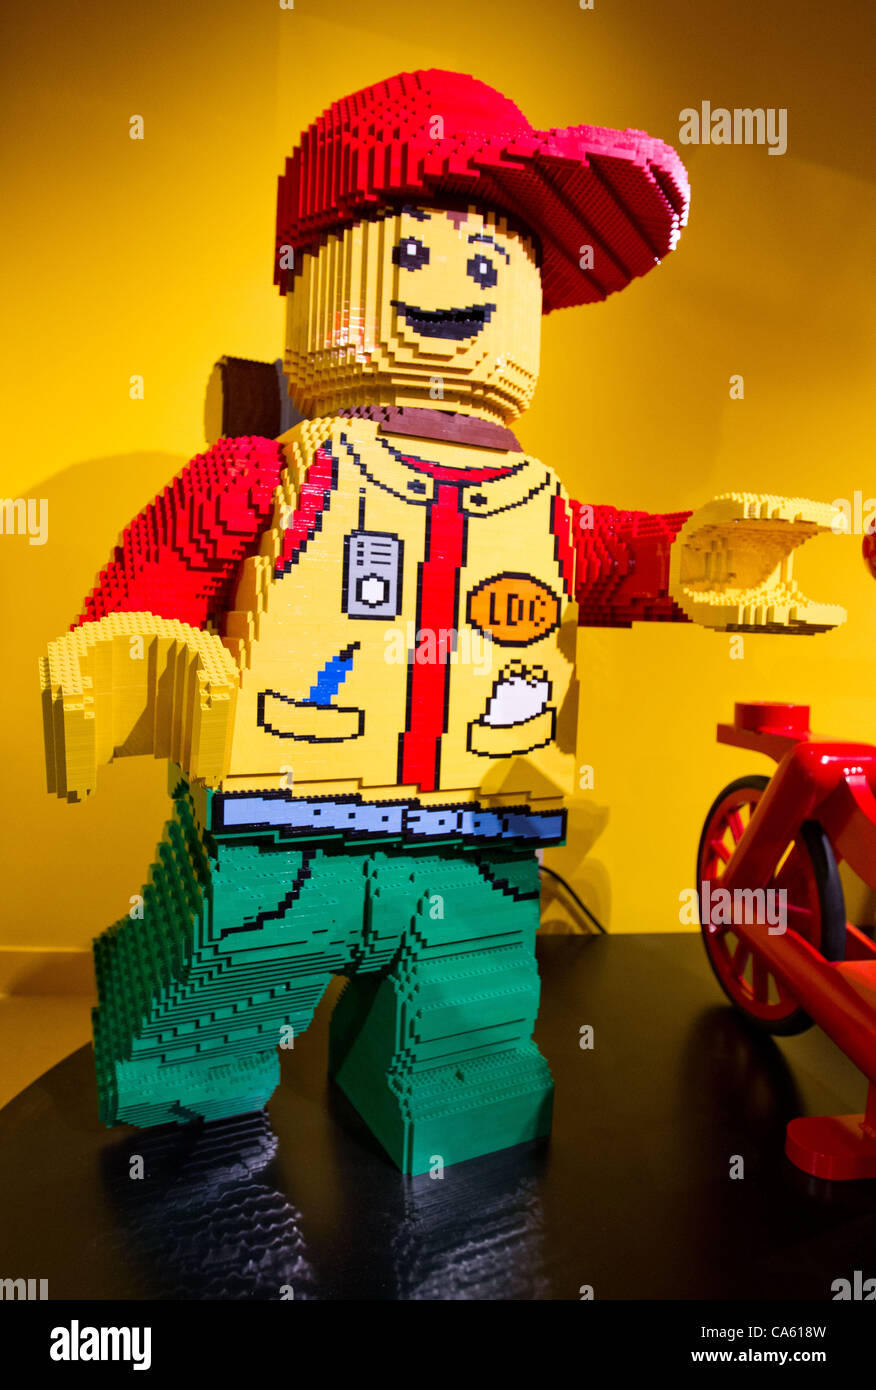 June 14, 2012, Tokyo, Japan - A giant Lego man character is seen on display  during a press preview event at the LEGOLAND Discovery Center Tokyo. The  LEGOLAND Discovery Center contains over